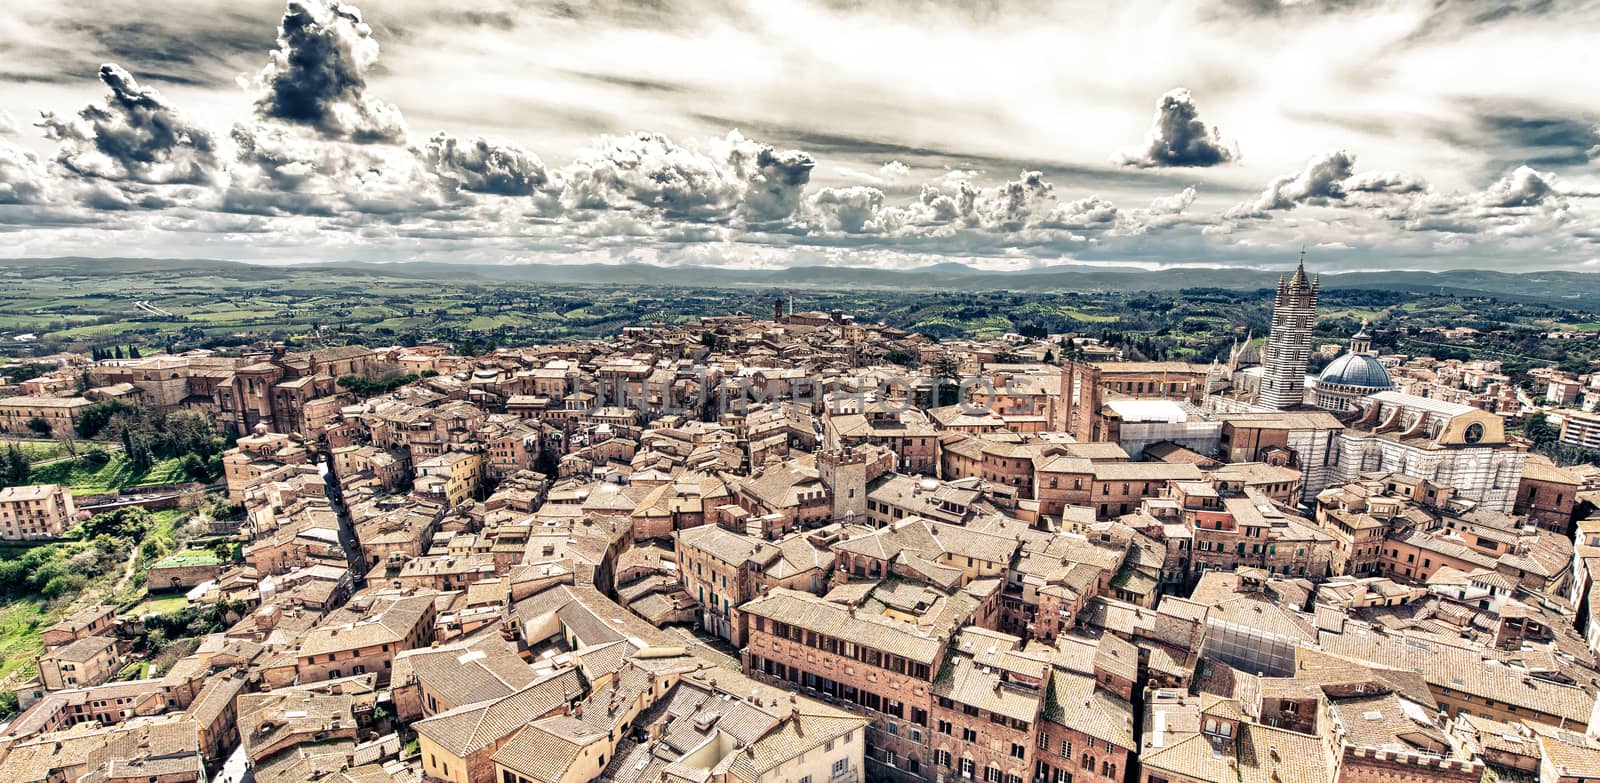 Siena, Italy. Beautiful view of famous medieval architecture.